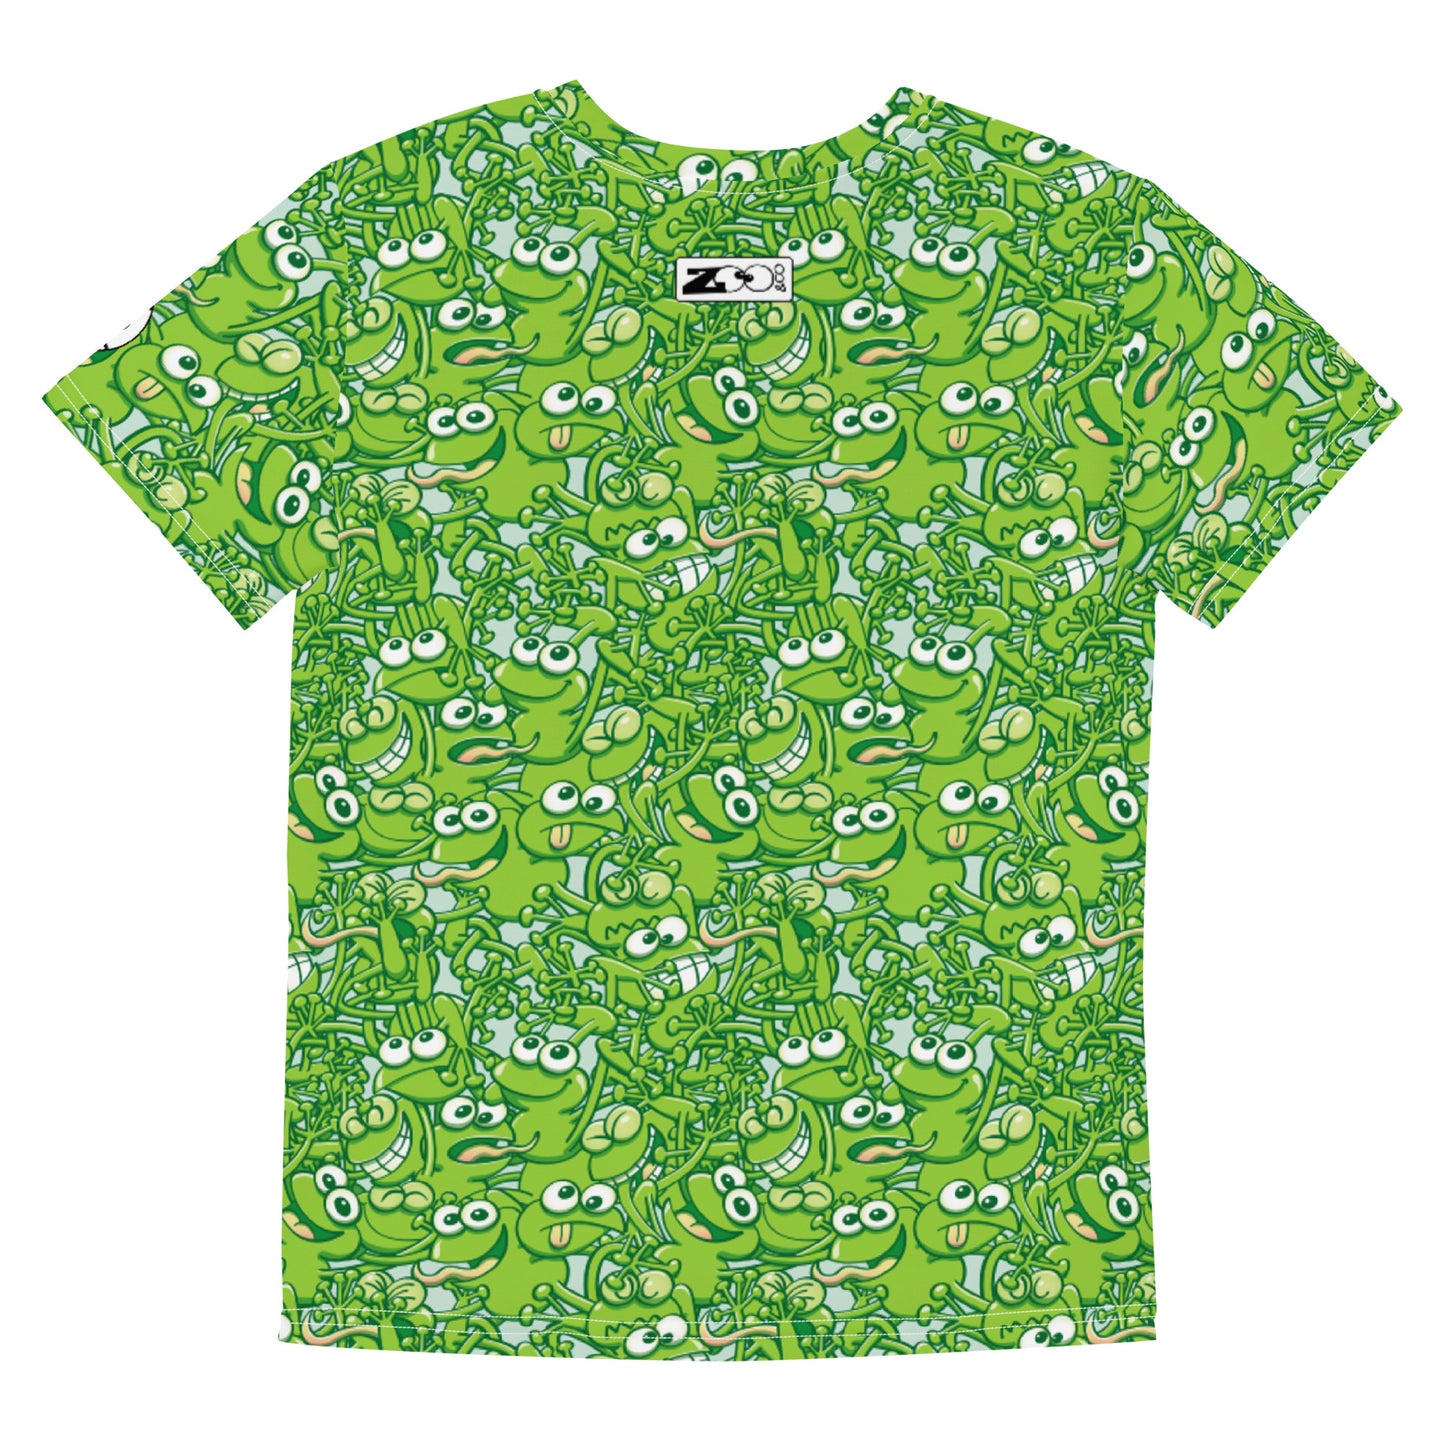 A tangled army of happy green frogs appears when the rain stops Youth crew neck t-shirt. Back view